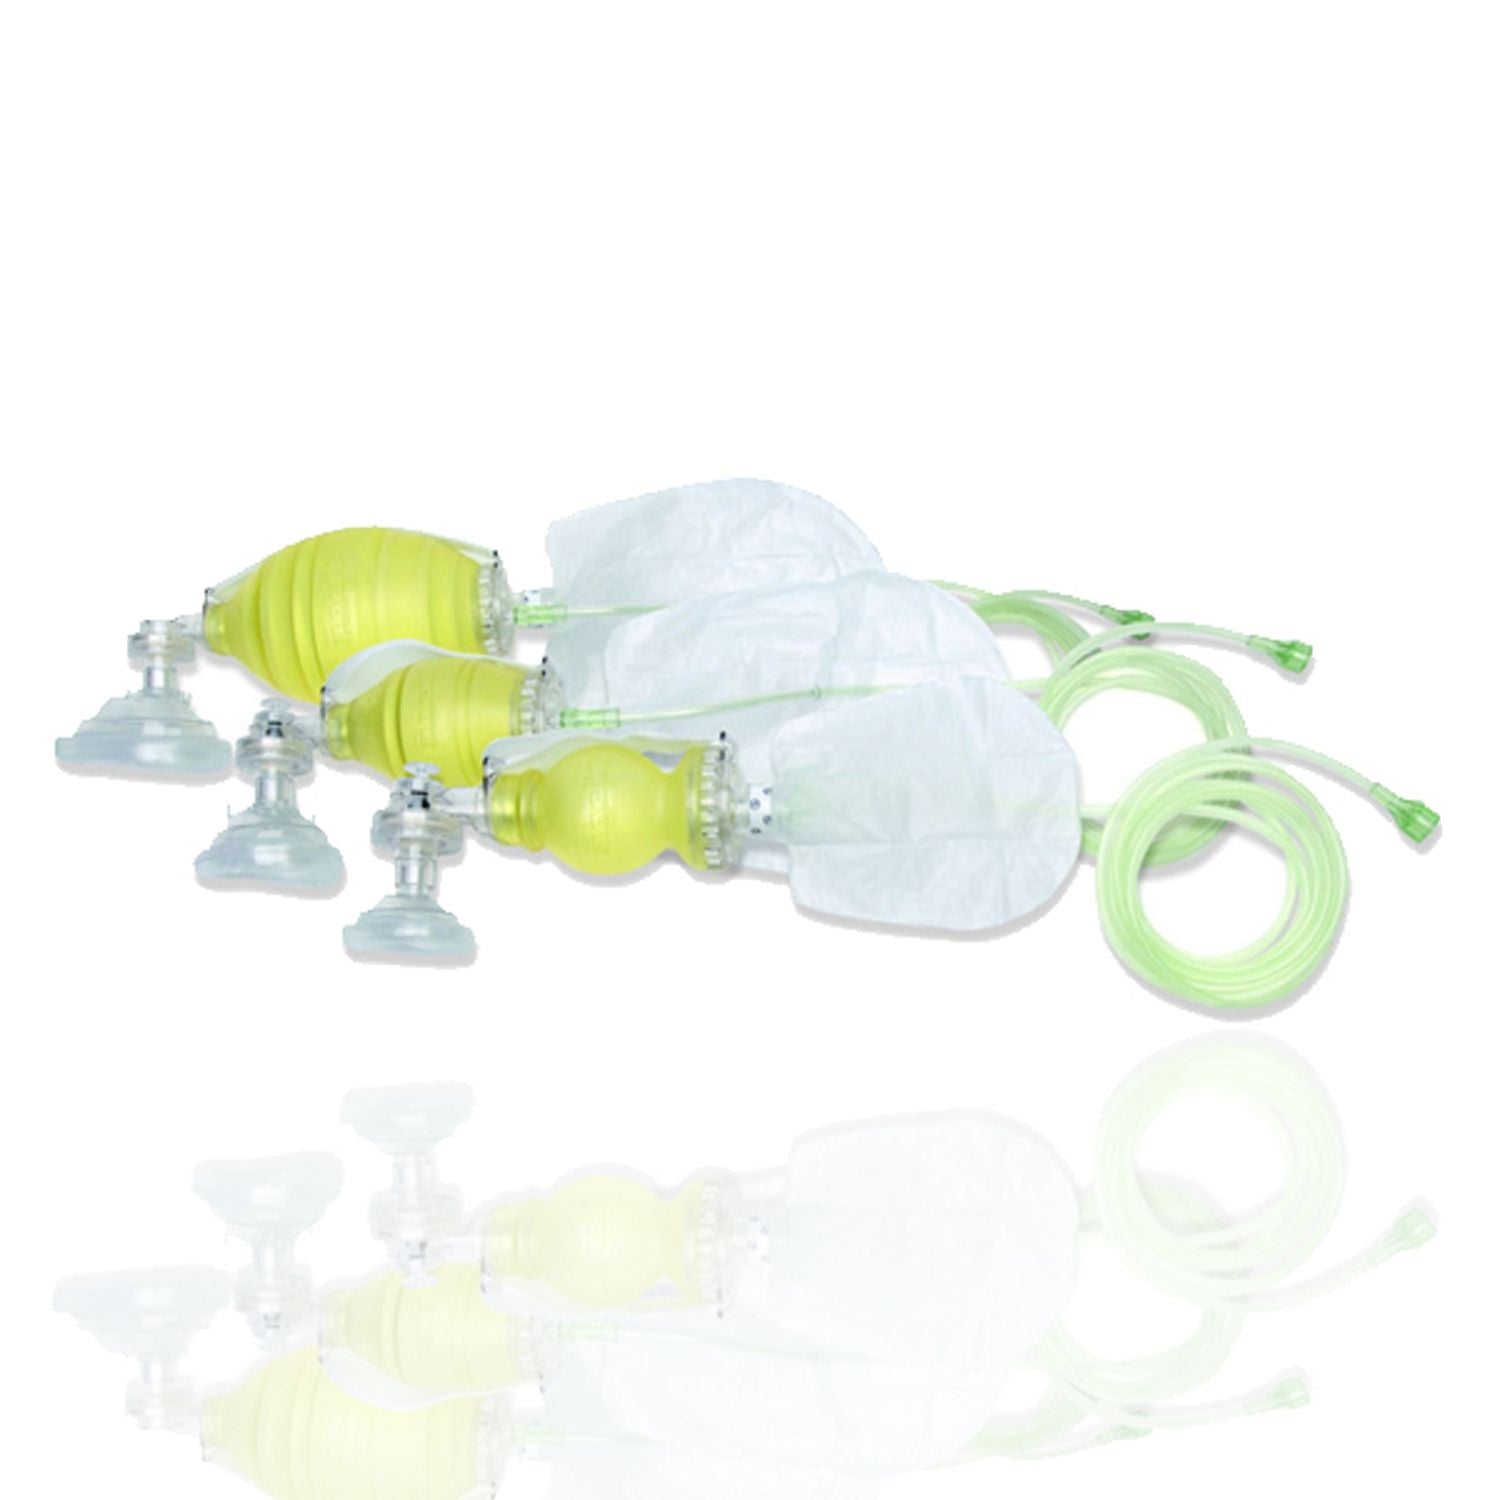 The Bag II Disposable Resuscitator with Adult Mask #5